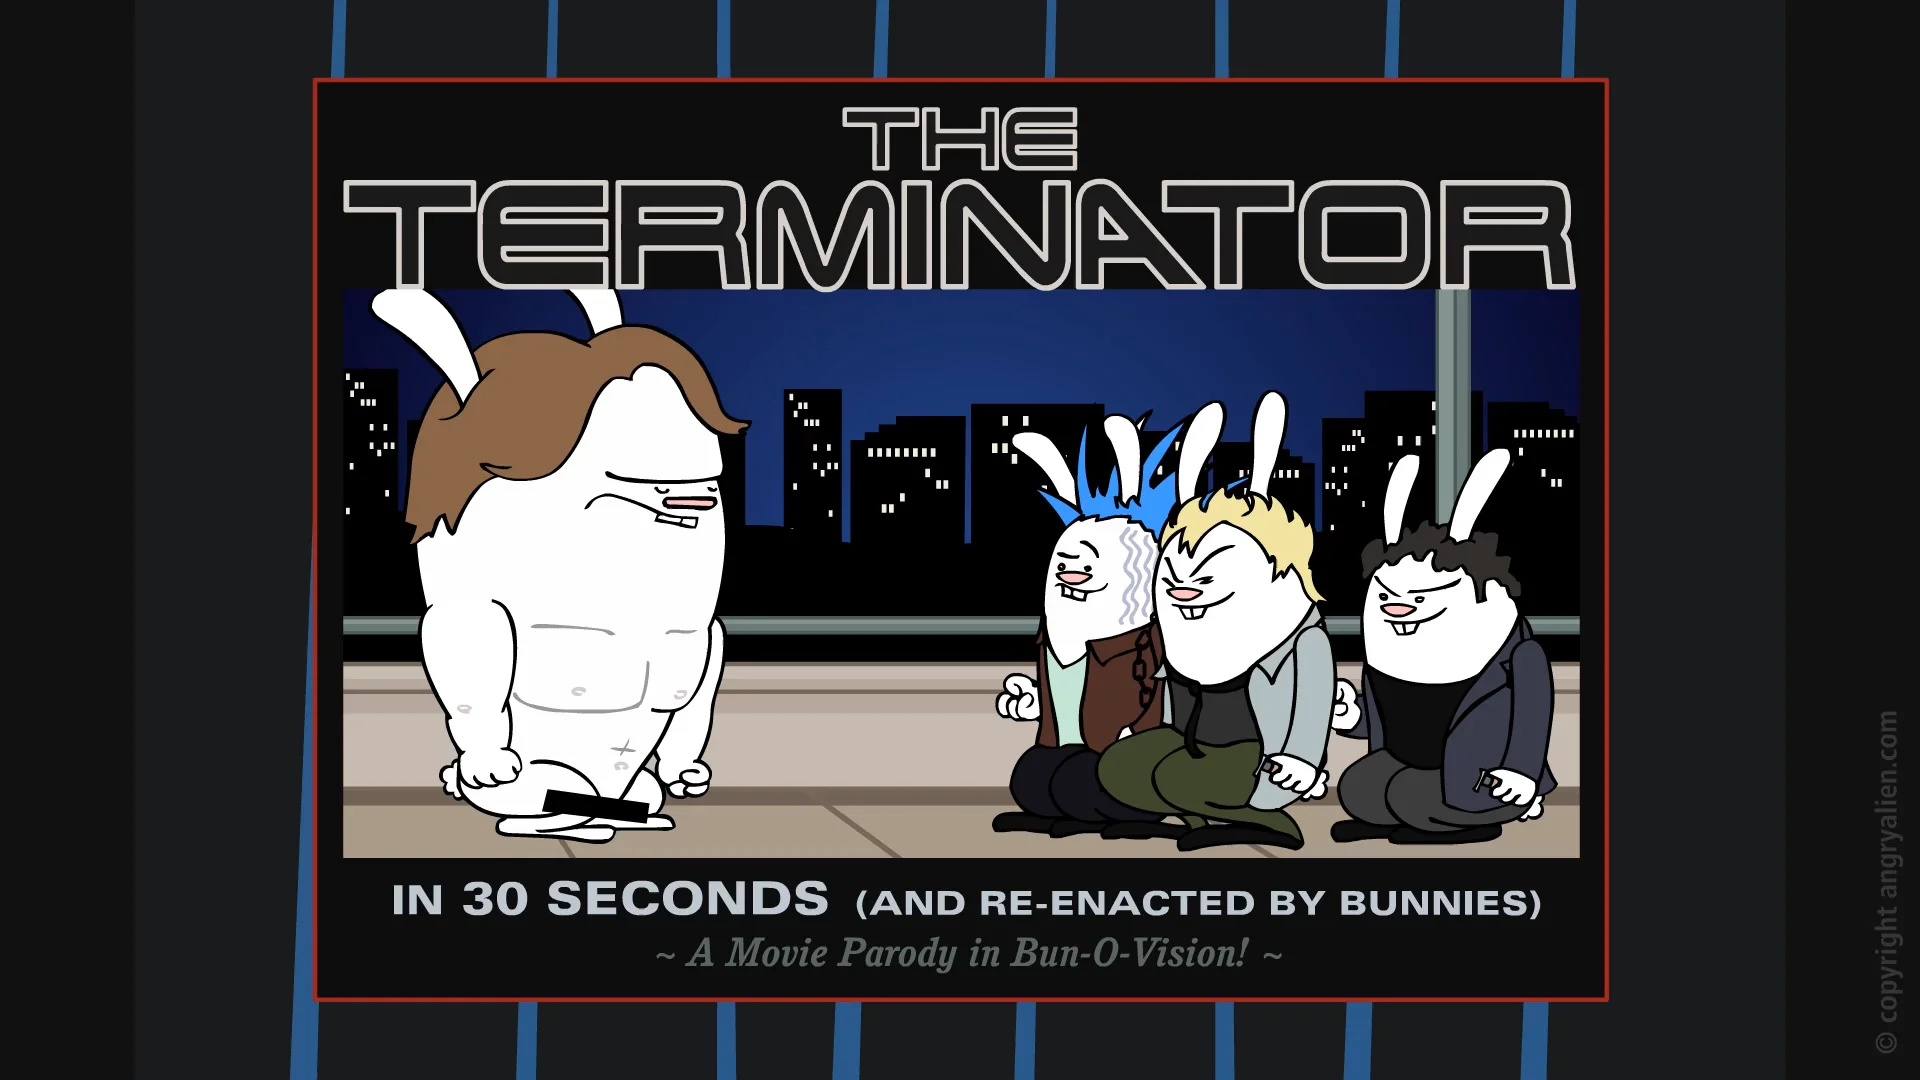 Shadow of the Electronic Terminator, Ice Age, and a Bunny